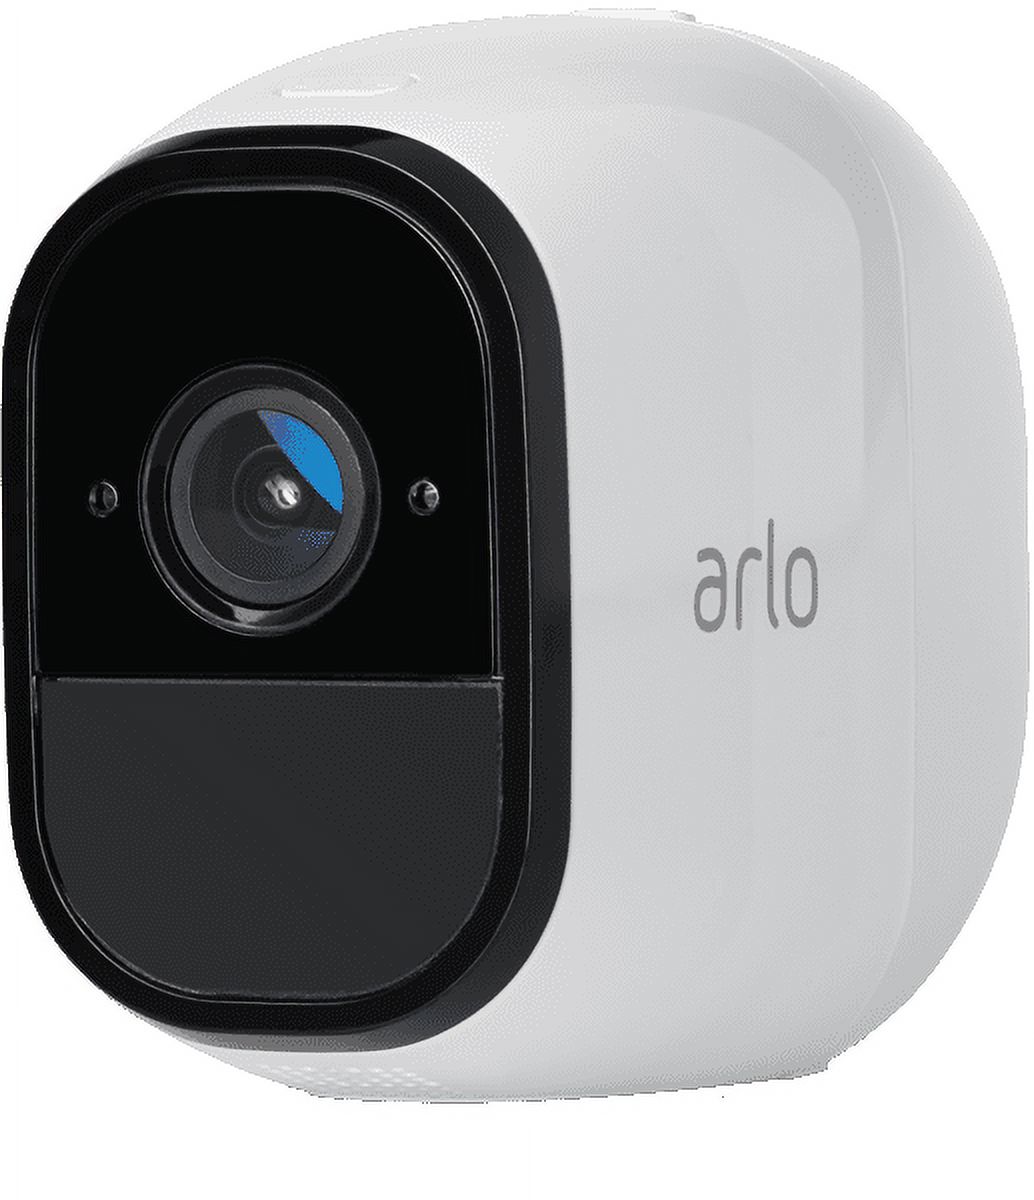 Arlo Pro 720P HD Security Camera System VMS4230 with FREE Outdoor Mount VMA1000 - 2 Wire-Free Rechargeable Battery Cameras with Two-Way Audio, Indoor/Outdoor, Night Vision, Motion Detection - image 3 of 16